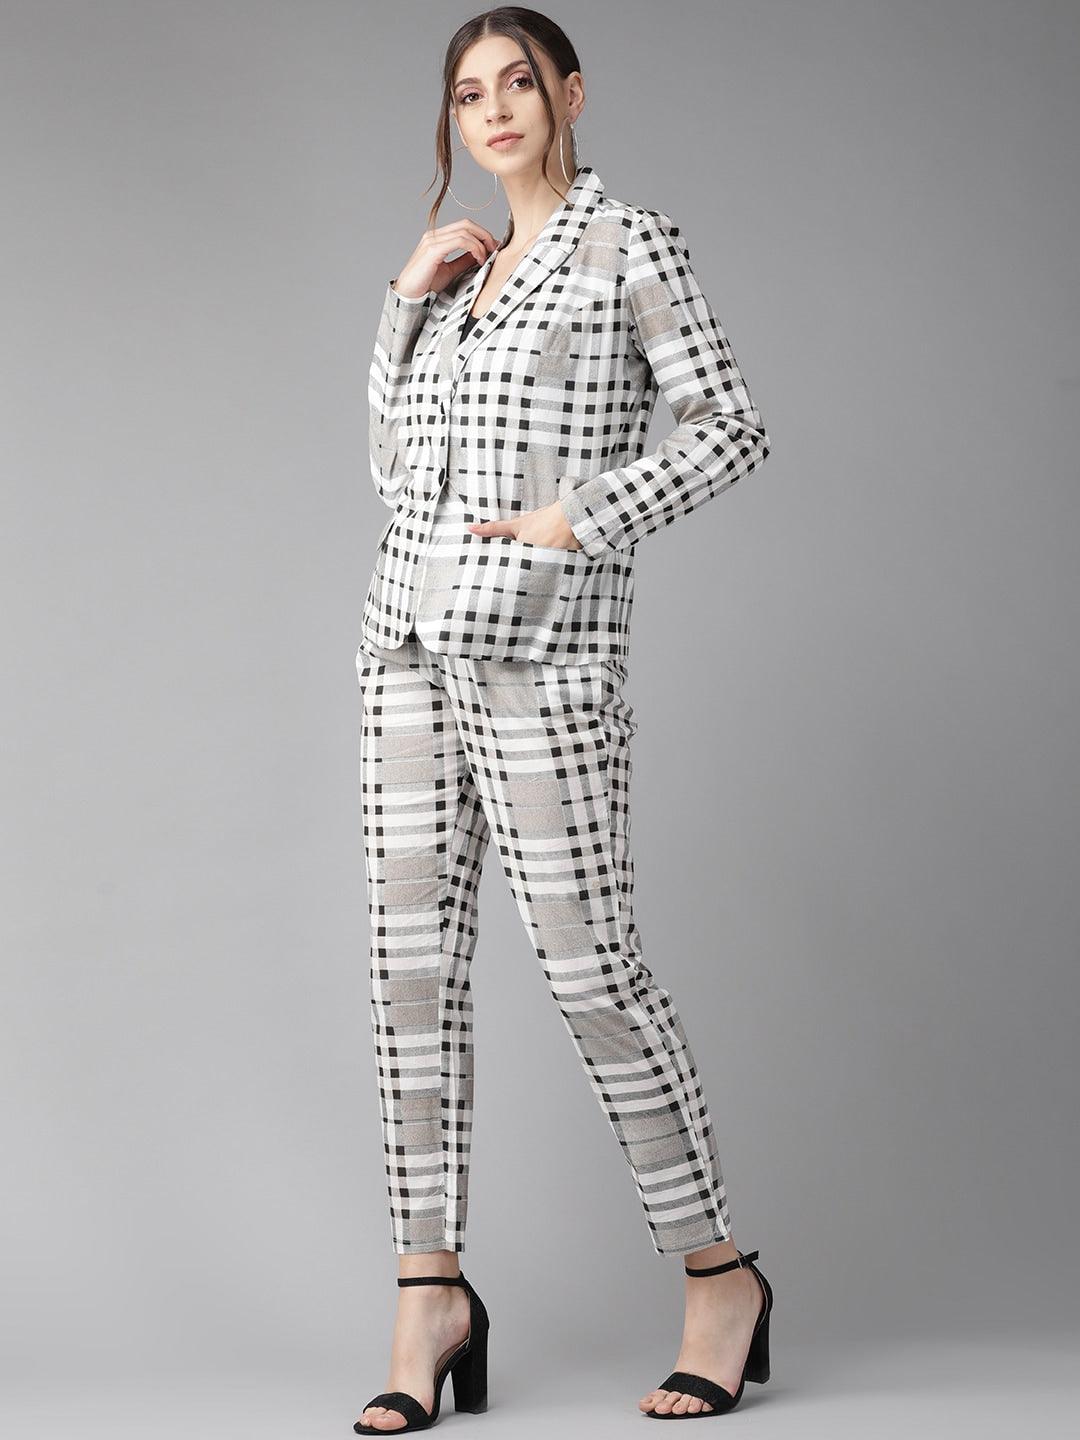 White &amp; Black Checked Blazer with Trousers (Fully Stitched) - Znxclothing